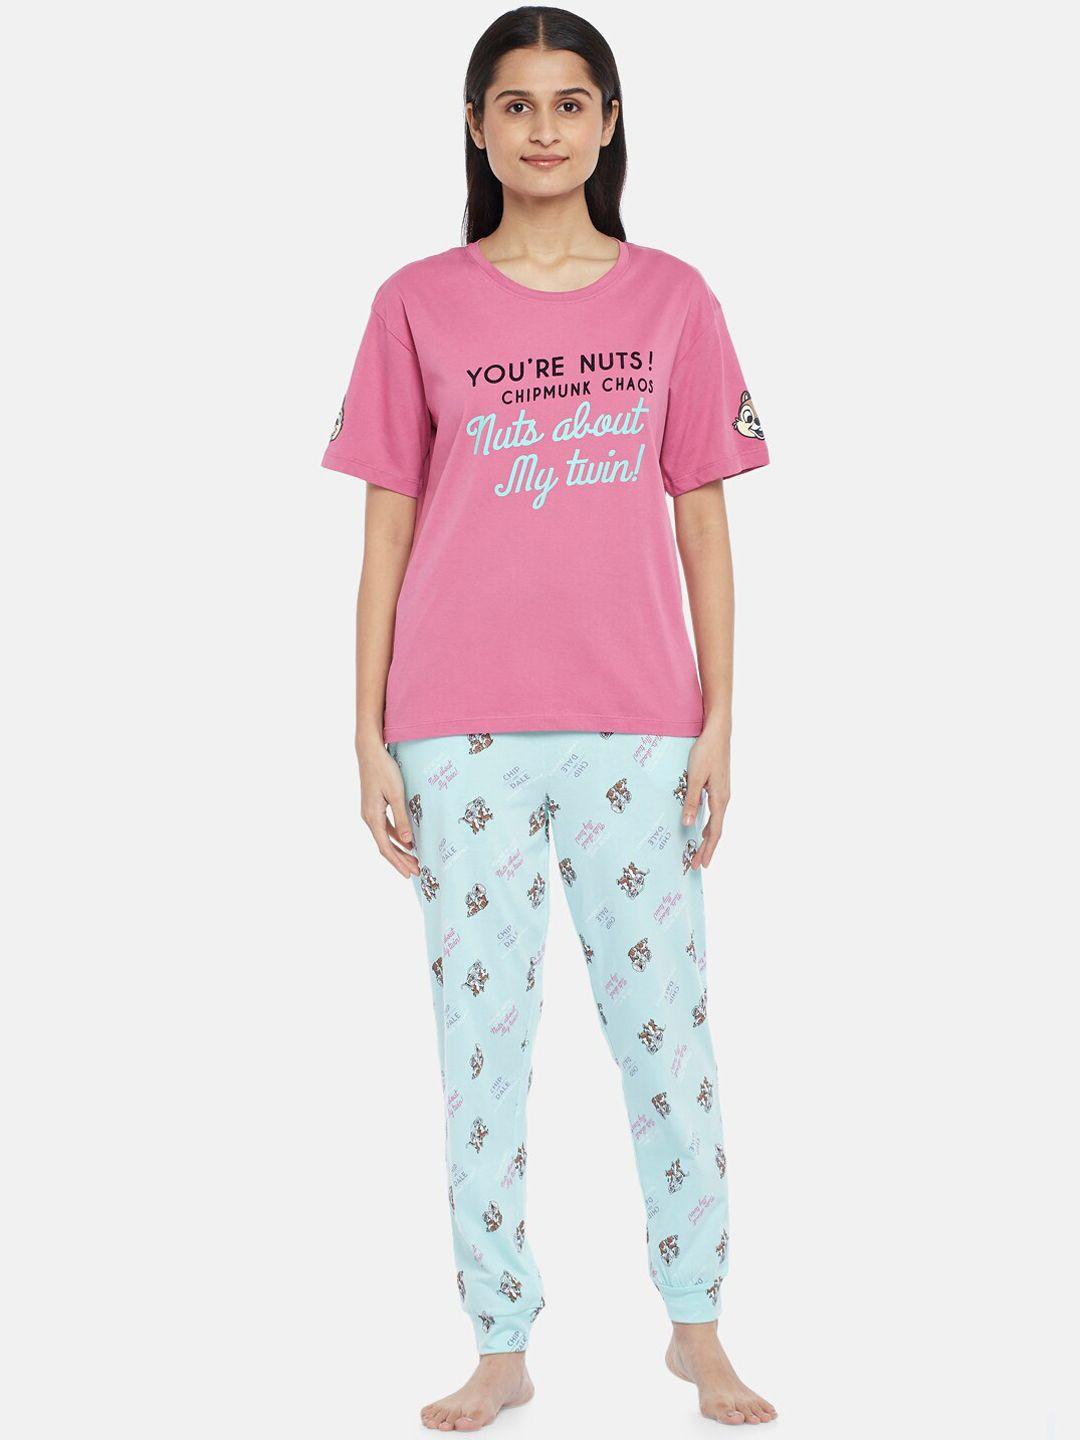 dreamz-by-pantaloons-typography-printed-pure-cotton-night-suit